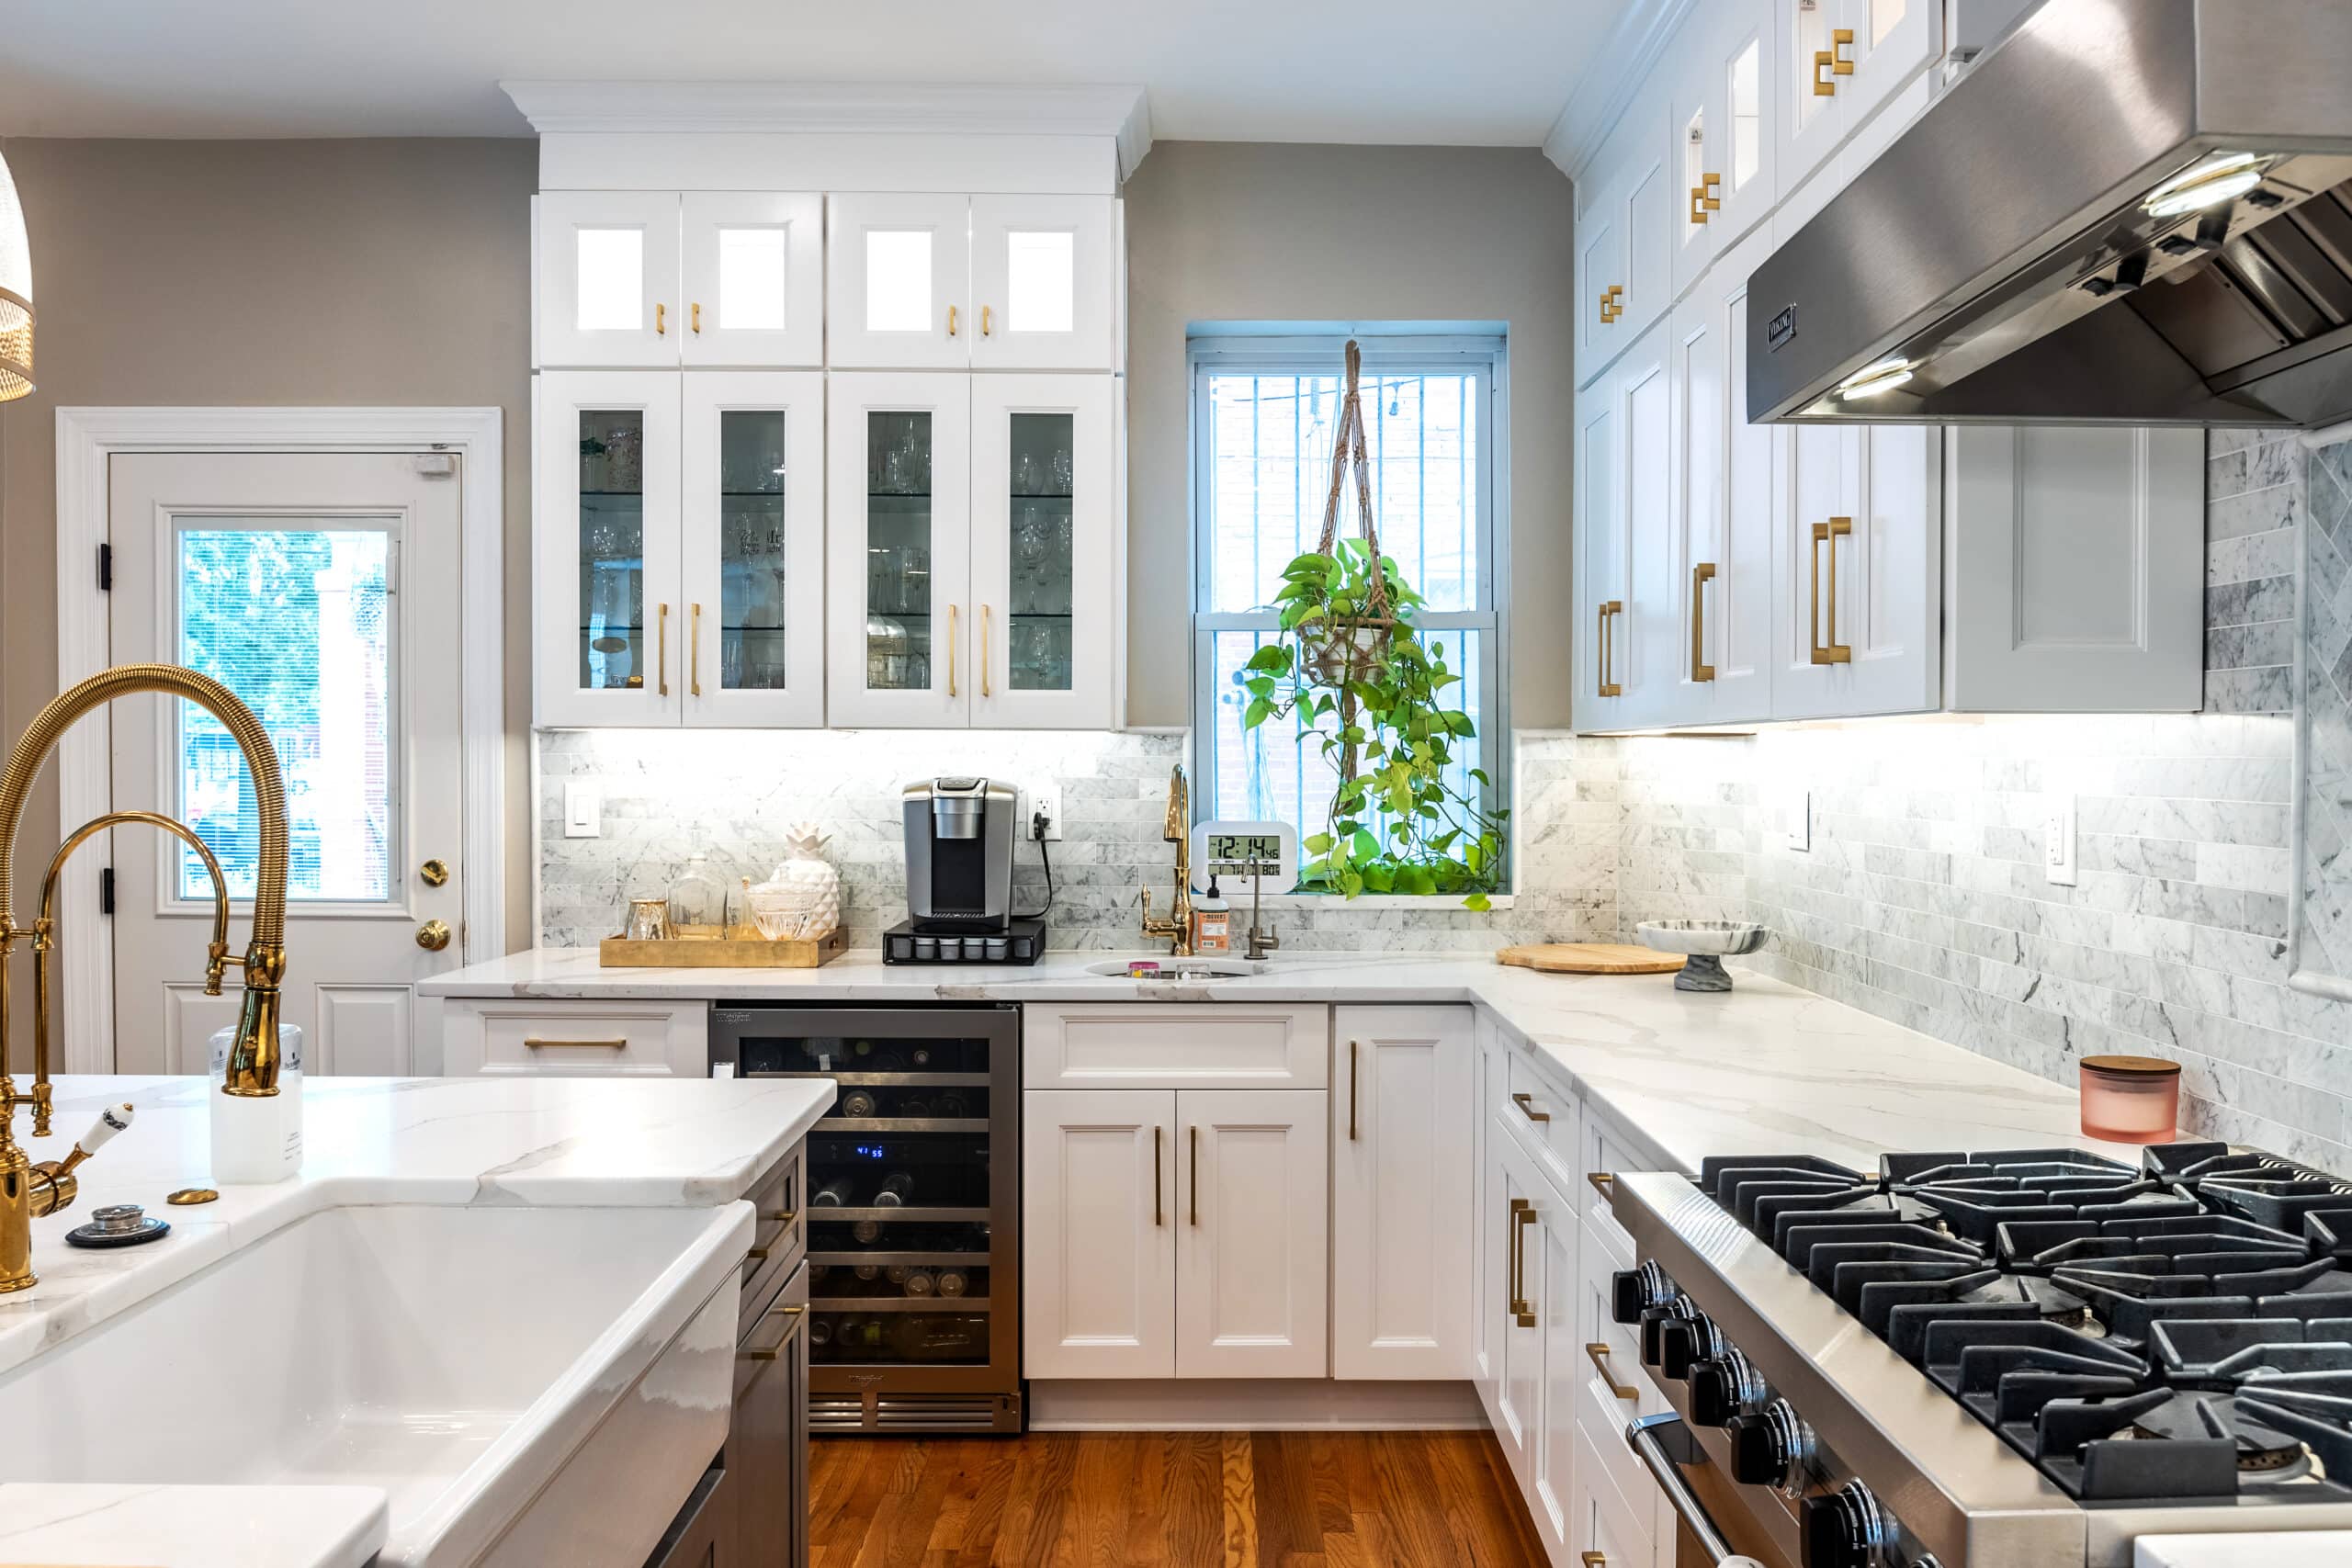 A kitchen with white cabinets and brass fixtures